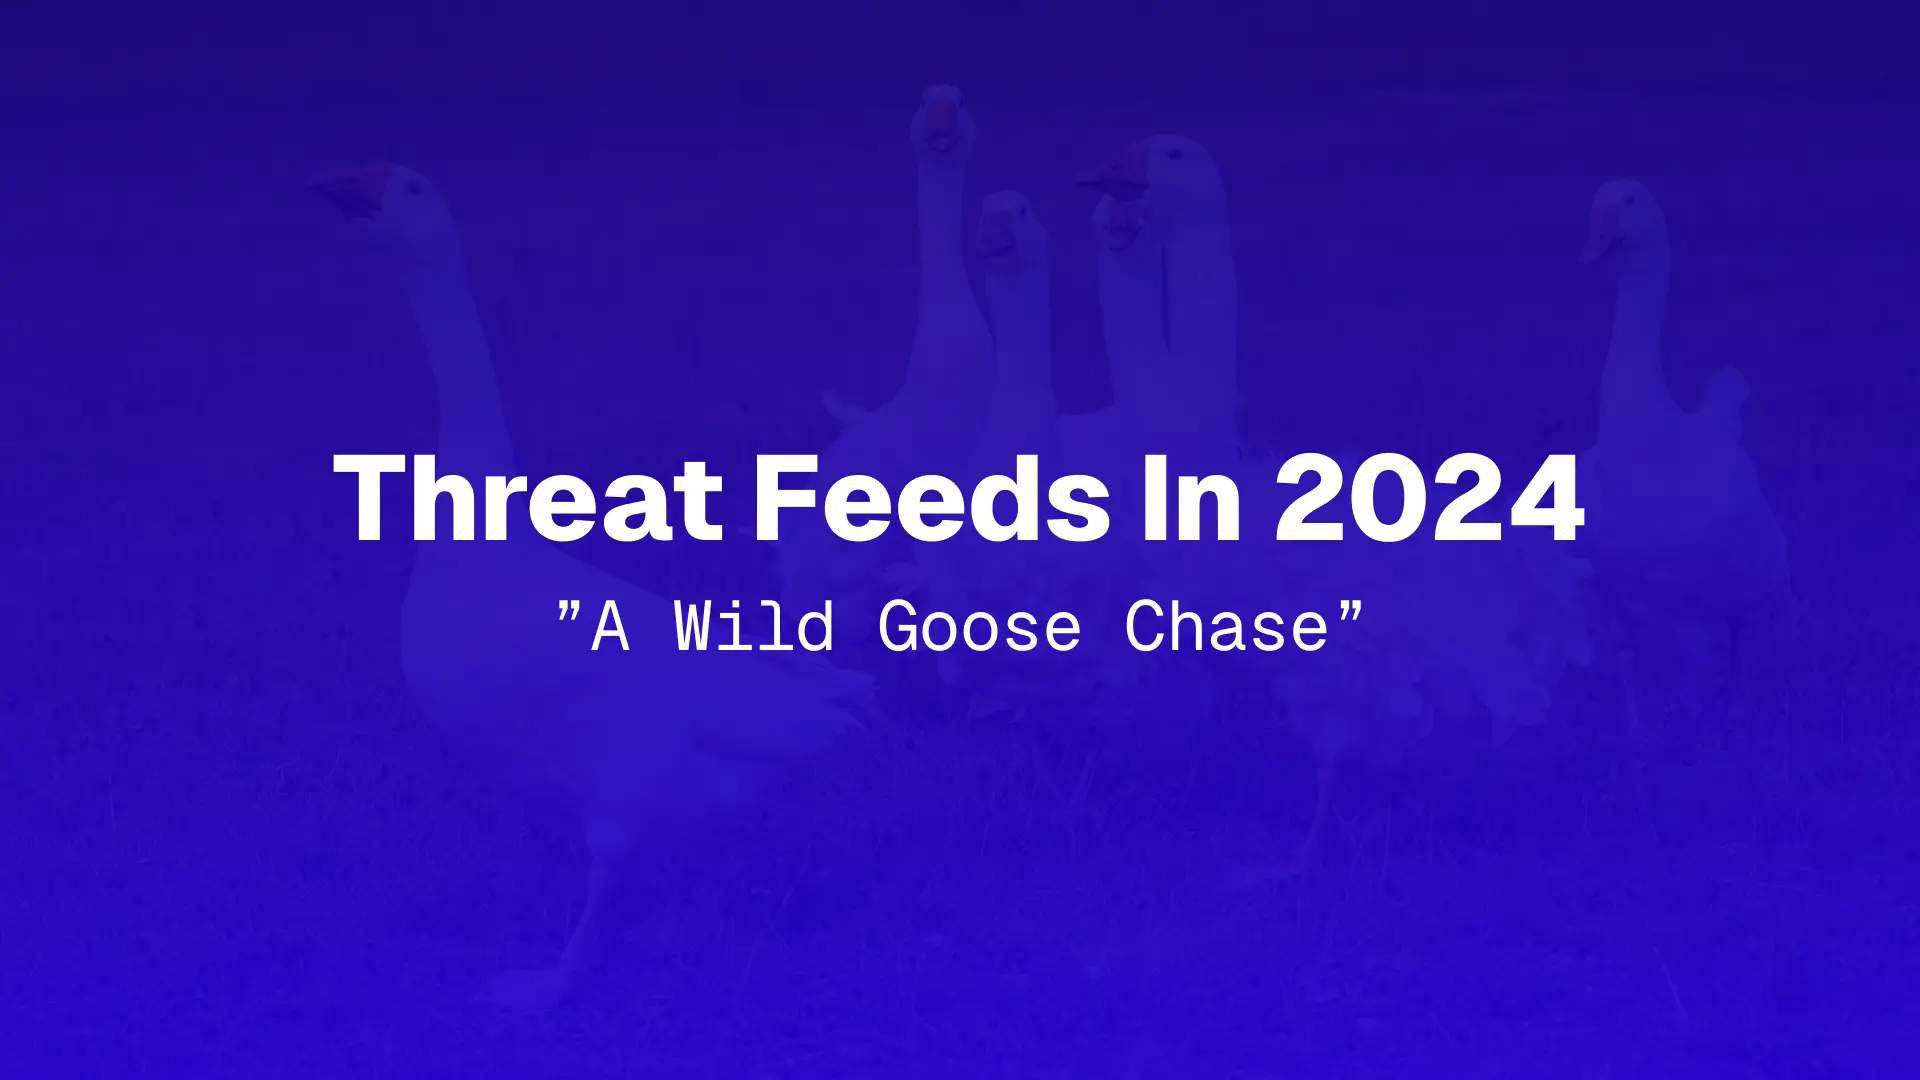 An image of geese with text "Threat Feeds in 2024, A Wild Goose Chase"